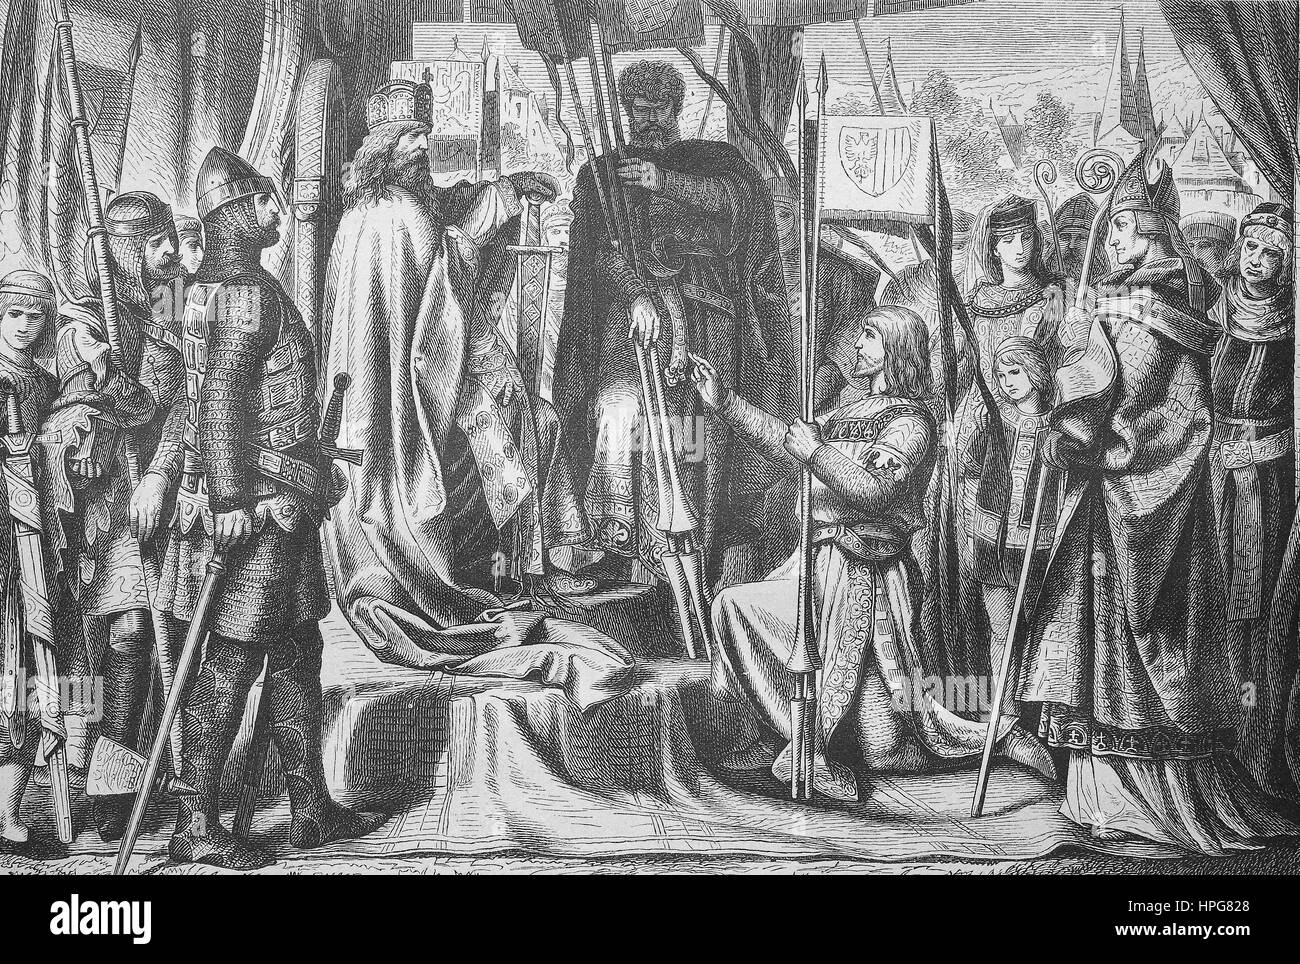 Heinrich II wird als erster Herzog von Oesterreich belehnt, Henry II was the first duke of Austria to be enthroned, Henry II, Heinrich, 1112 - 1177, called Jasomirgott, was the Count Palatine of the Rhine from 1140 to 1141, the Margrave of Austria from 1141 to 1156, the Duke of Bavaria from 1141 to 1156 as Henry XI, and the Duke of Austria from 1156 to 1177. He was a member of the House of Babenberg, digital improved reproduction of a woodcut from the year 1885 Stock Photo